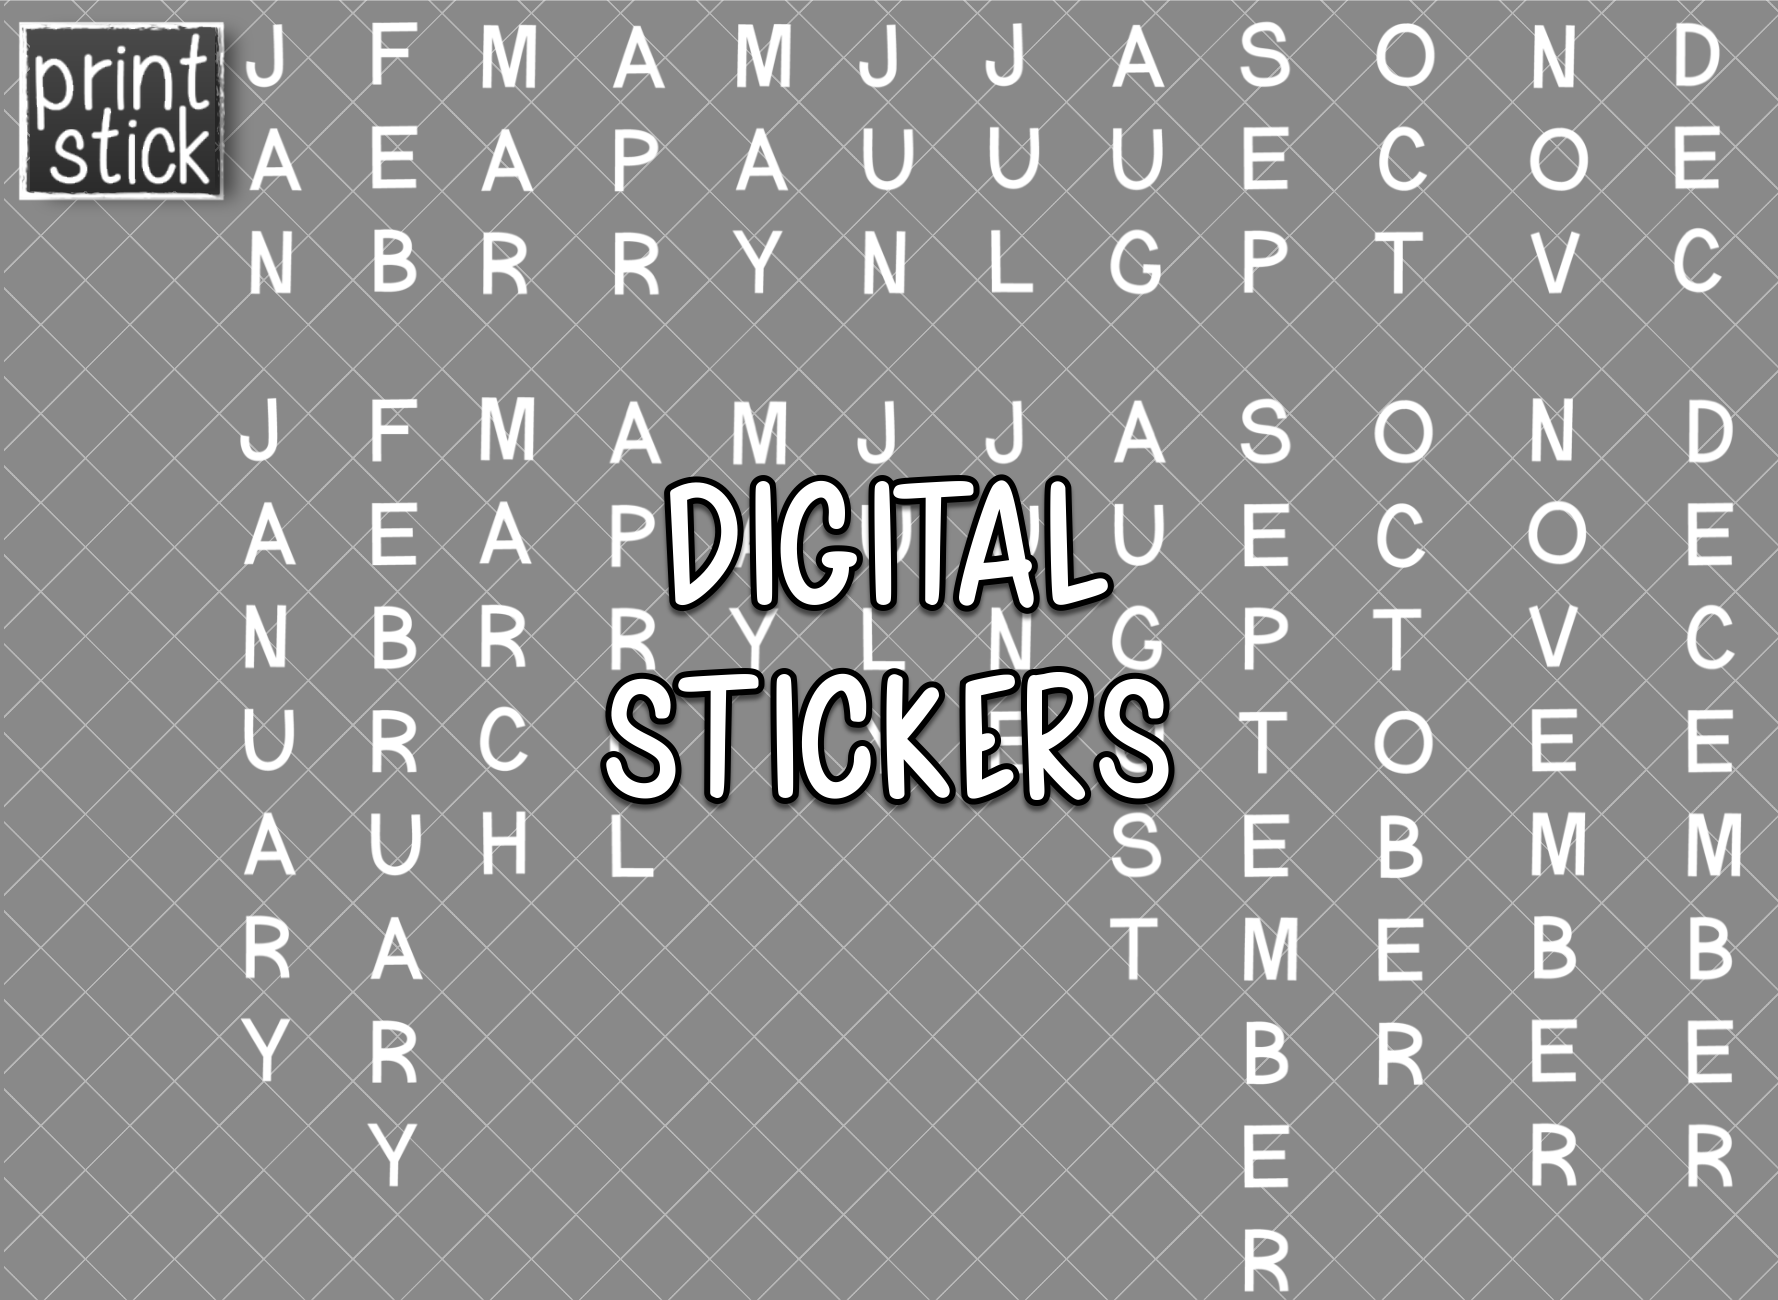 SS Month Labels - Vertical Digital Planner Stickers - Print Stick